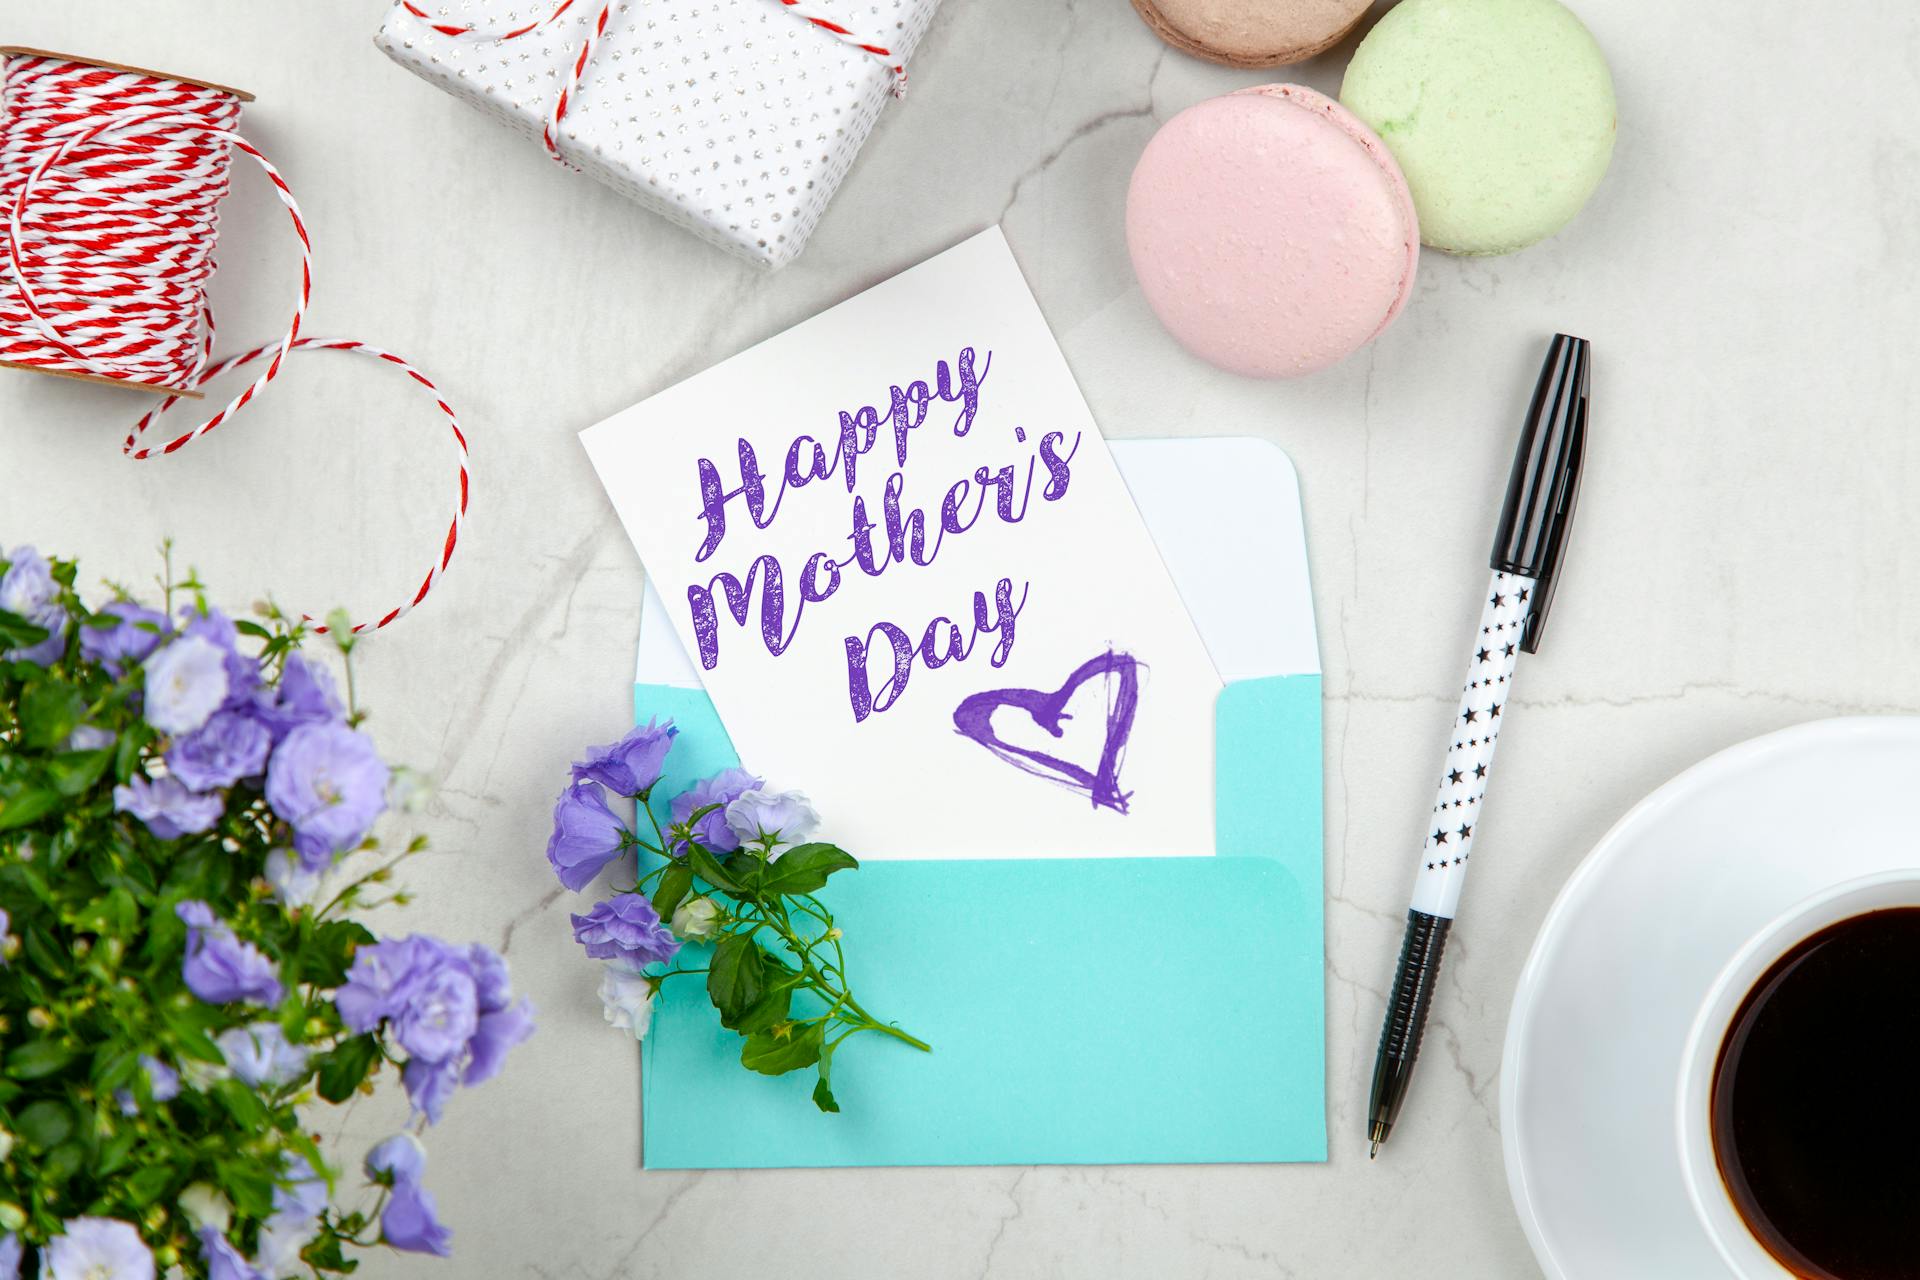 A mother's day card beside a pen, macaroons, flowers, and a box near a coffee cup with saucer | Source: Pexels